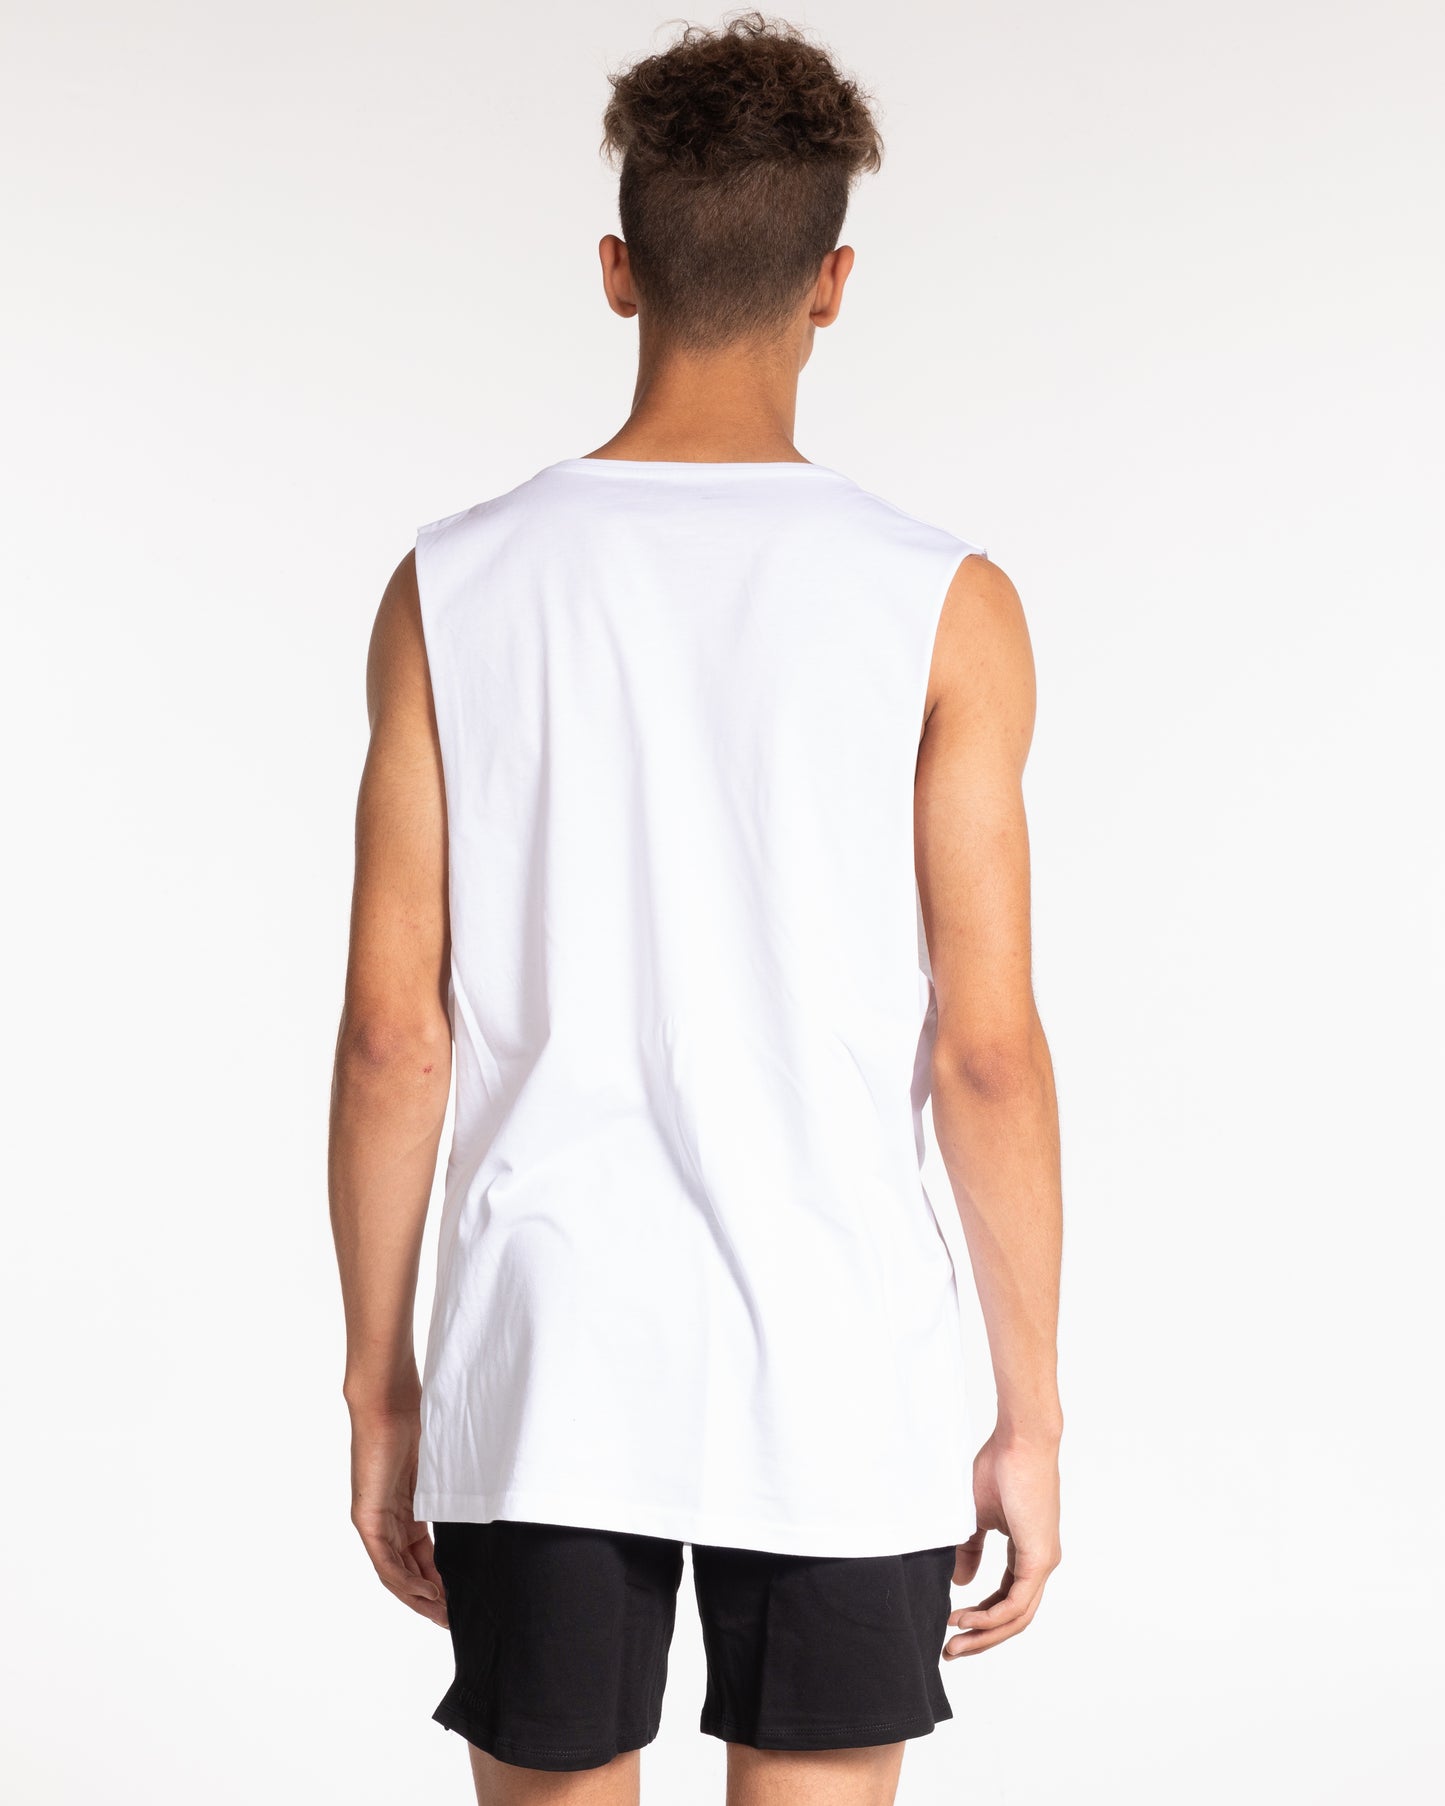 The Core Muscle Tank - White